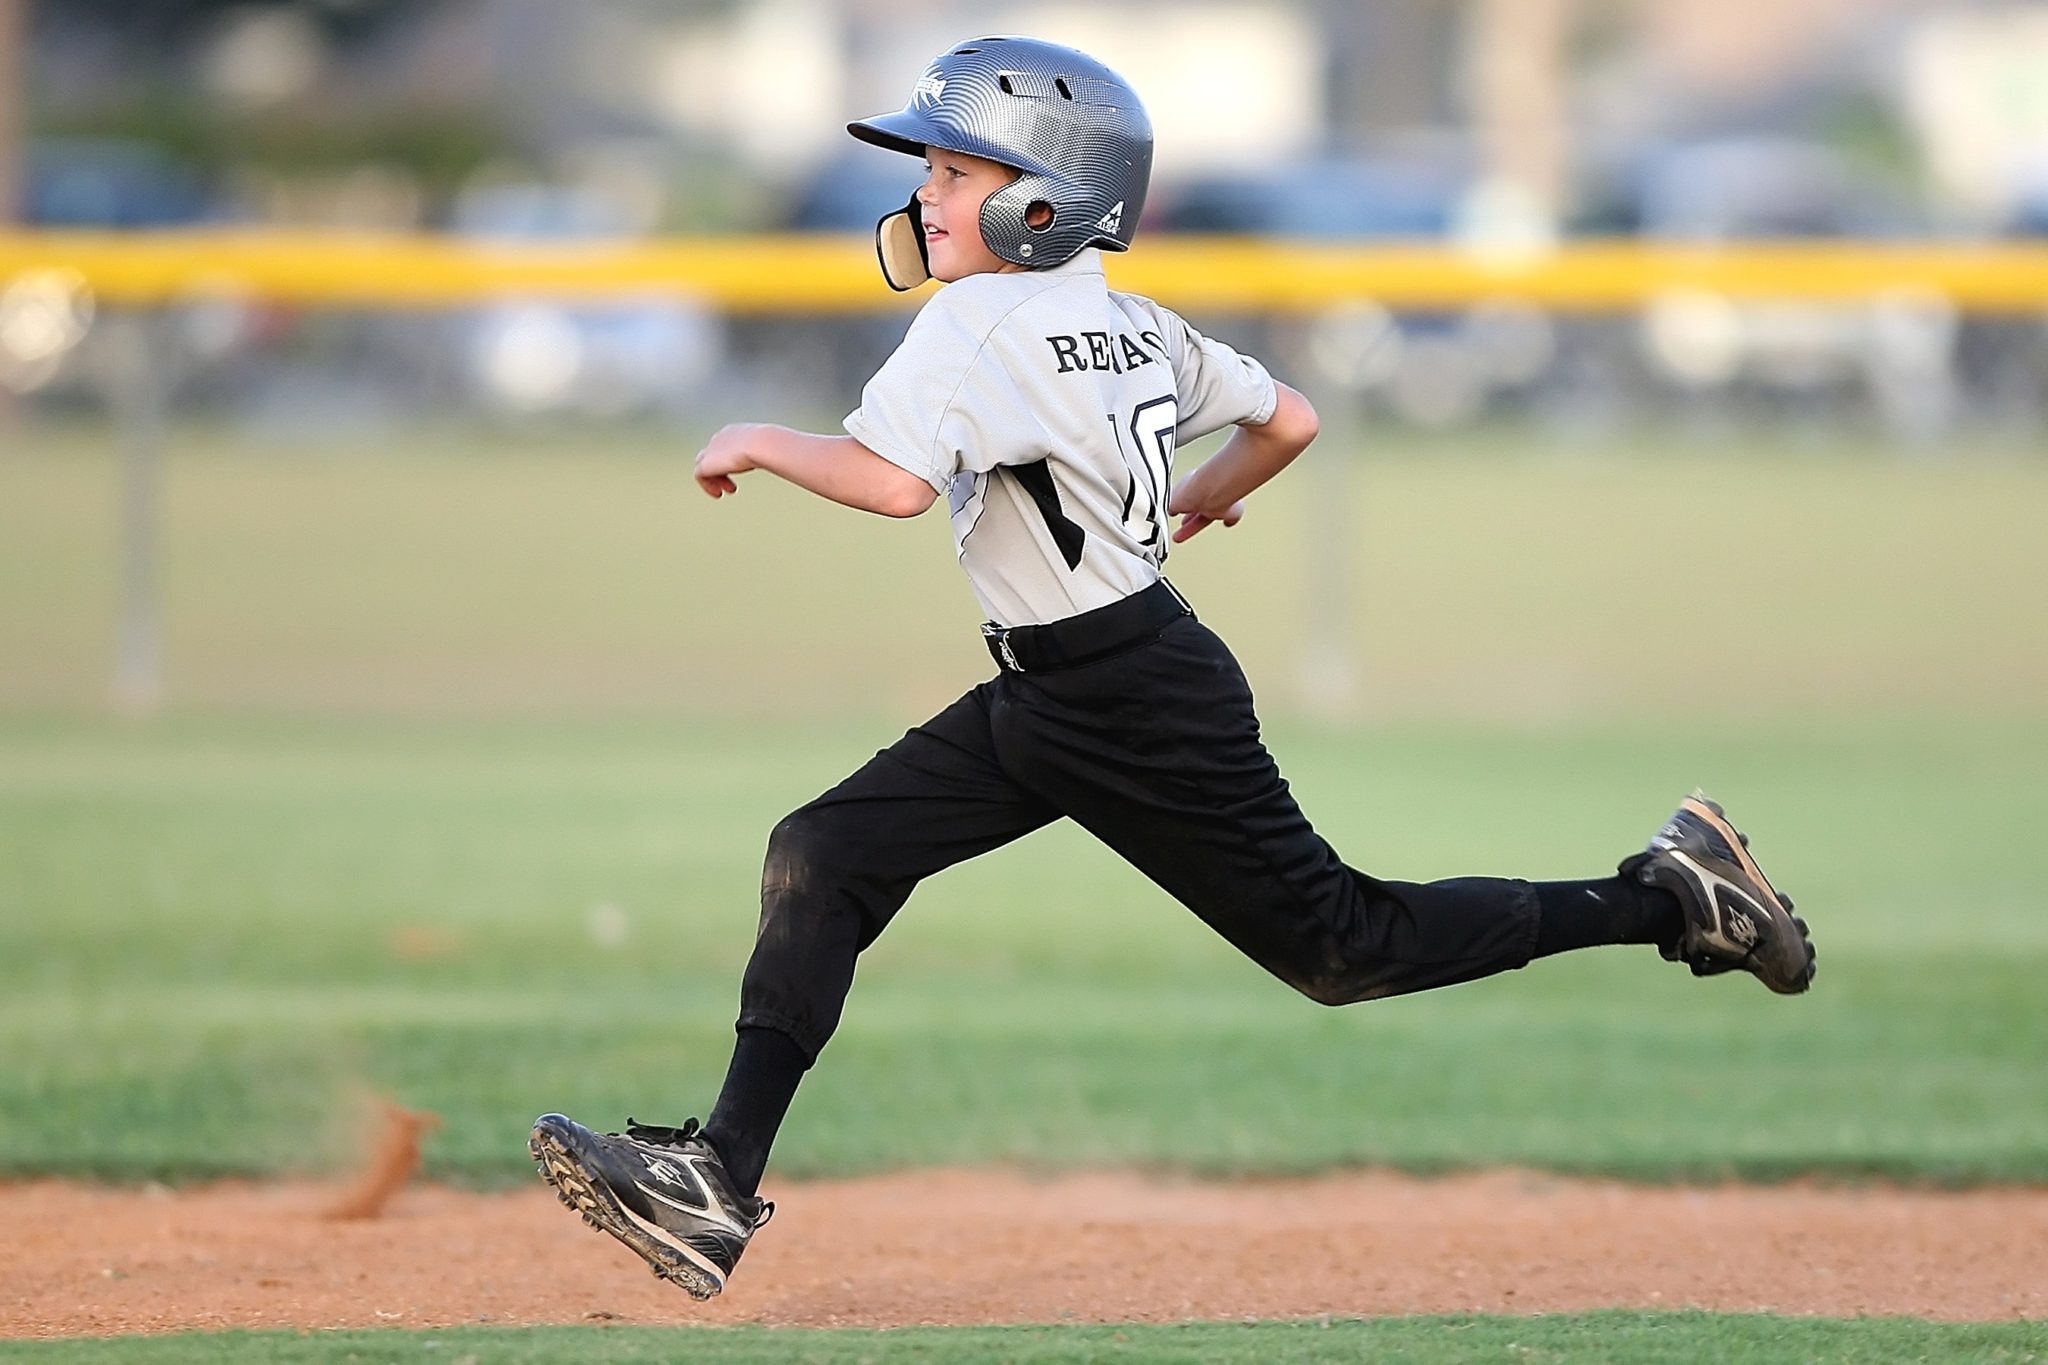 Choosing-the-right-baseball-cleat-will-optimize-the-baseball-experience-of-a-child.